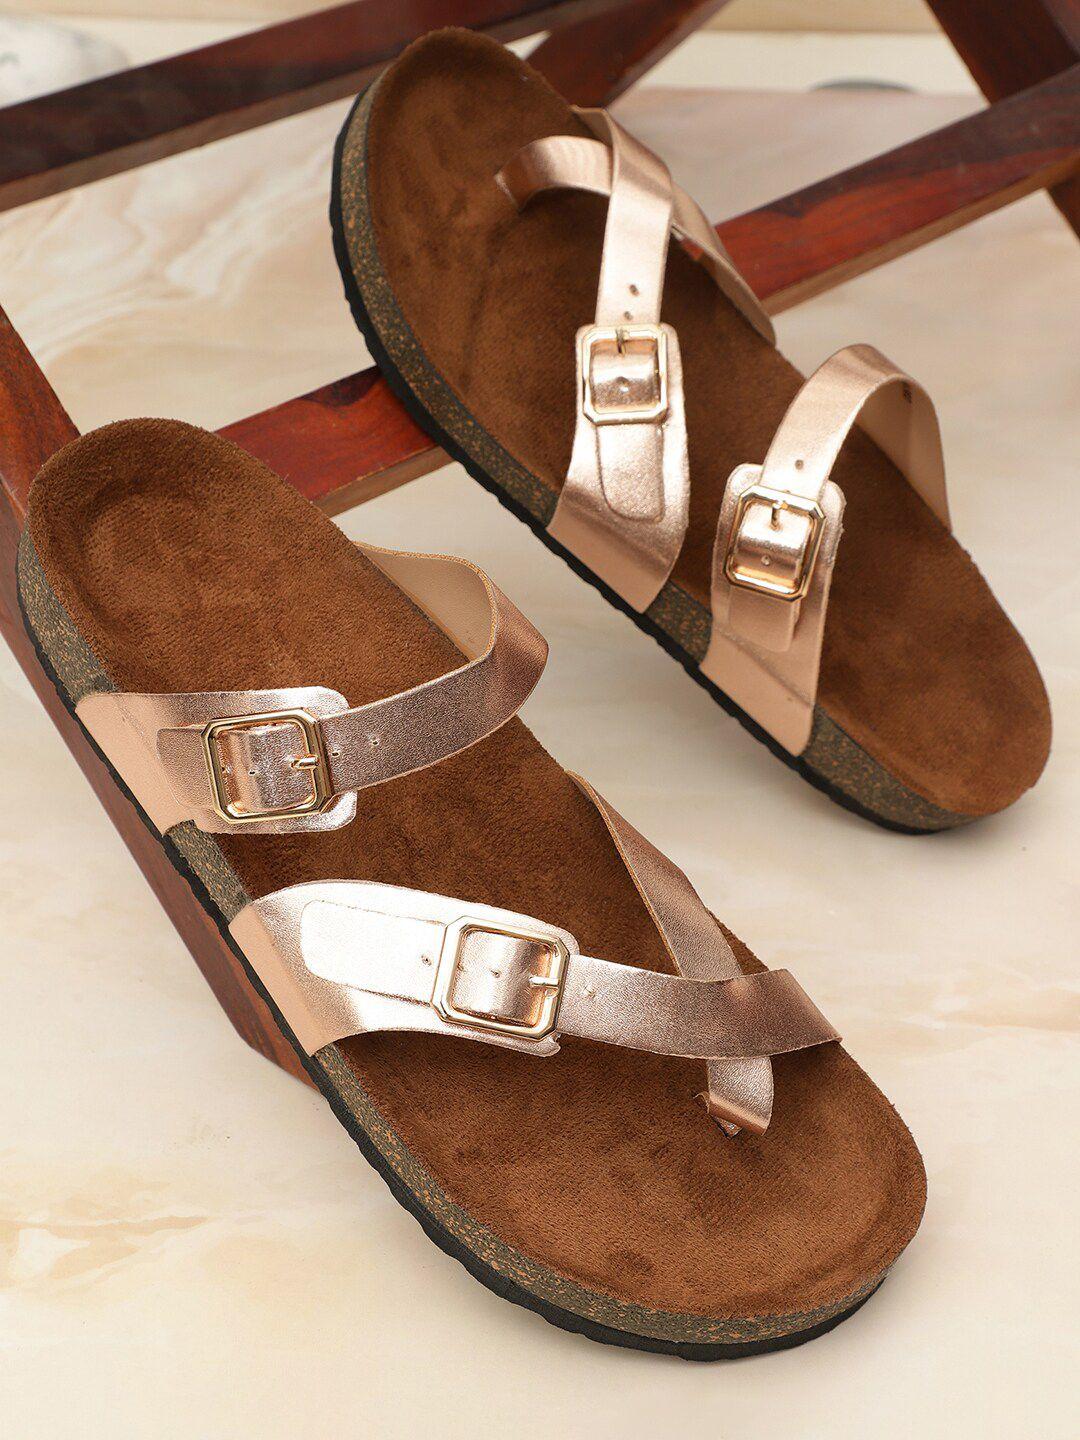 mozafia one toe flats with buckle detail